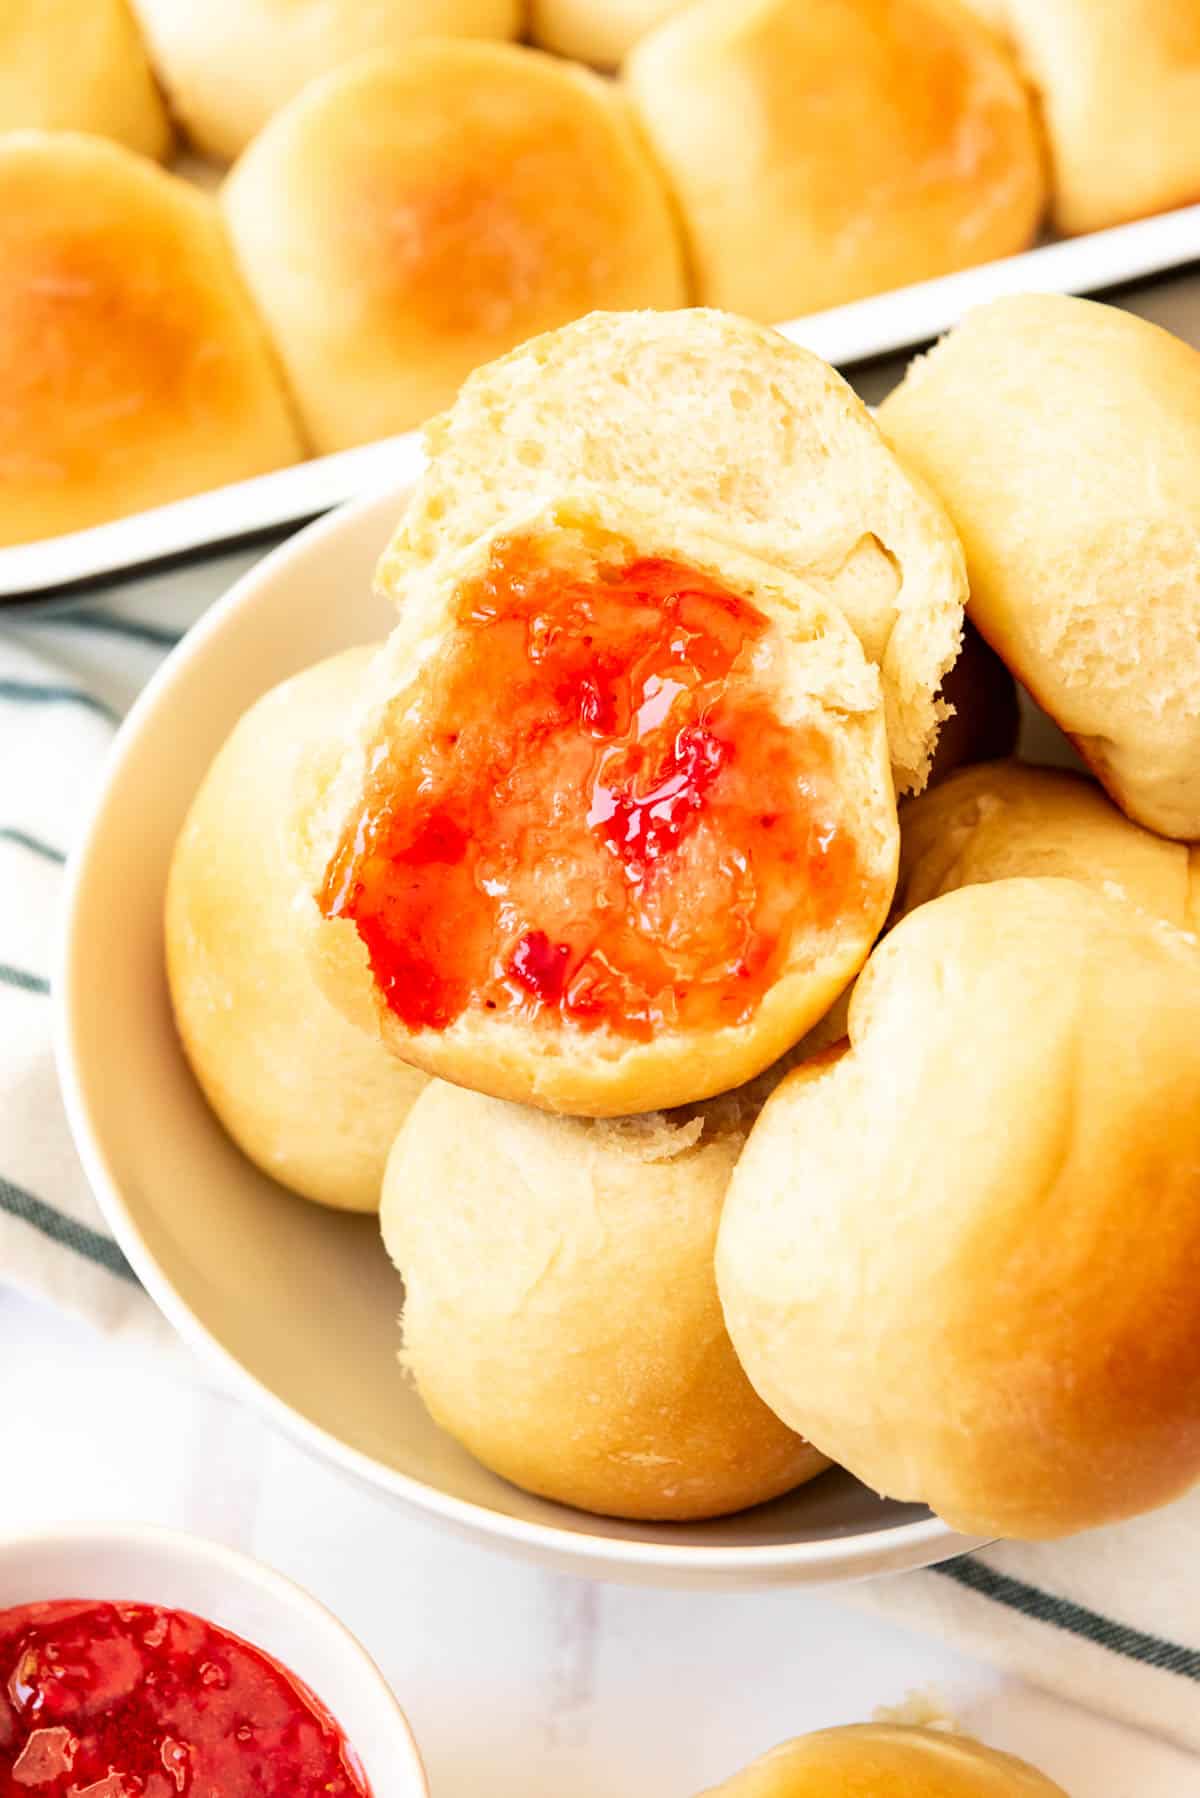 A close image of a potato roll that has been split open and covered in strawberry jam.